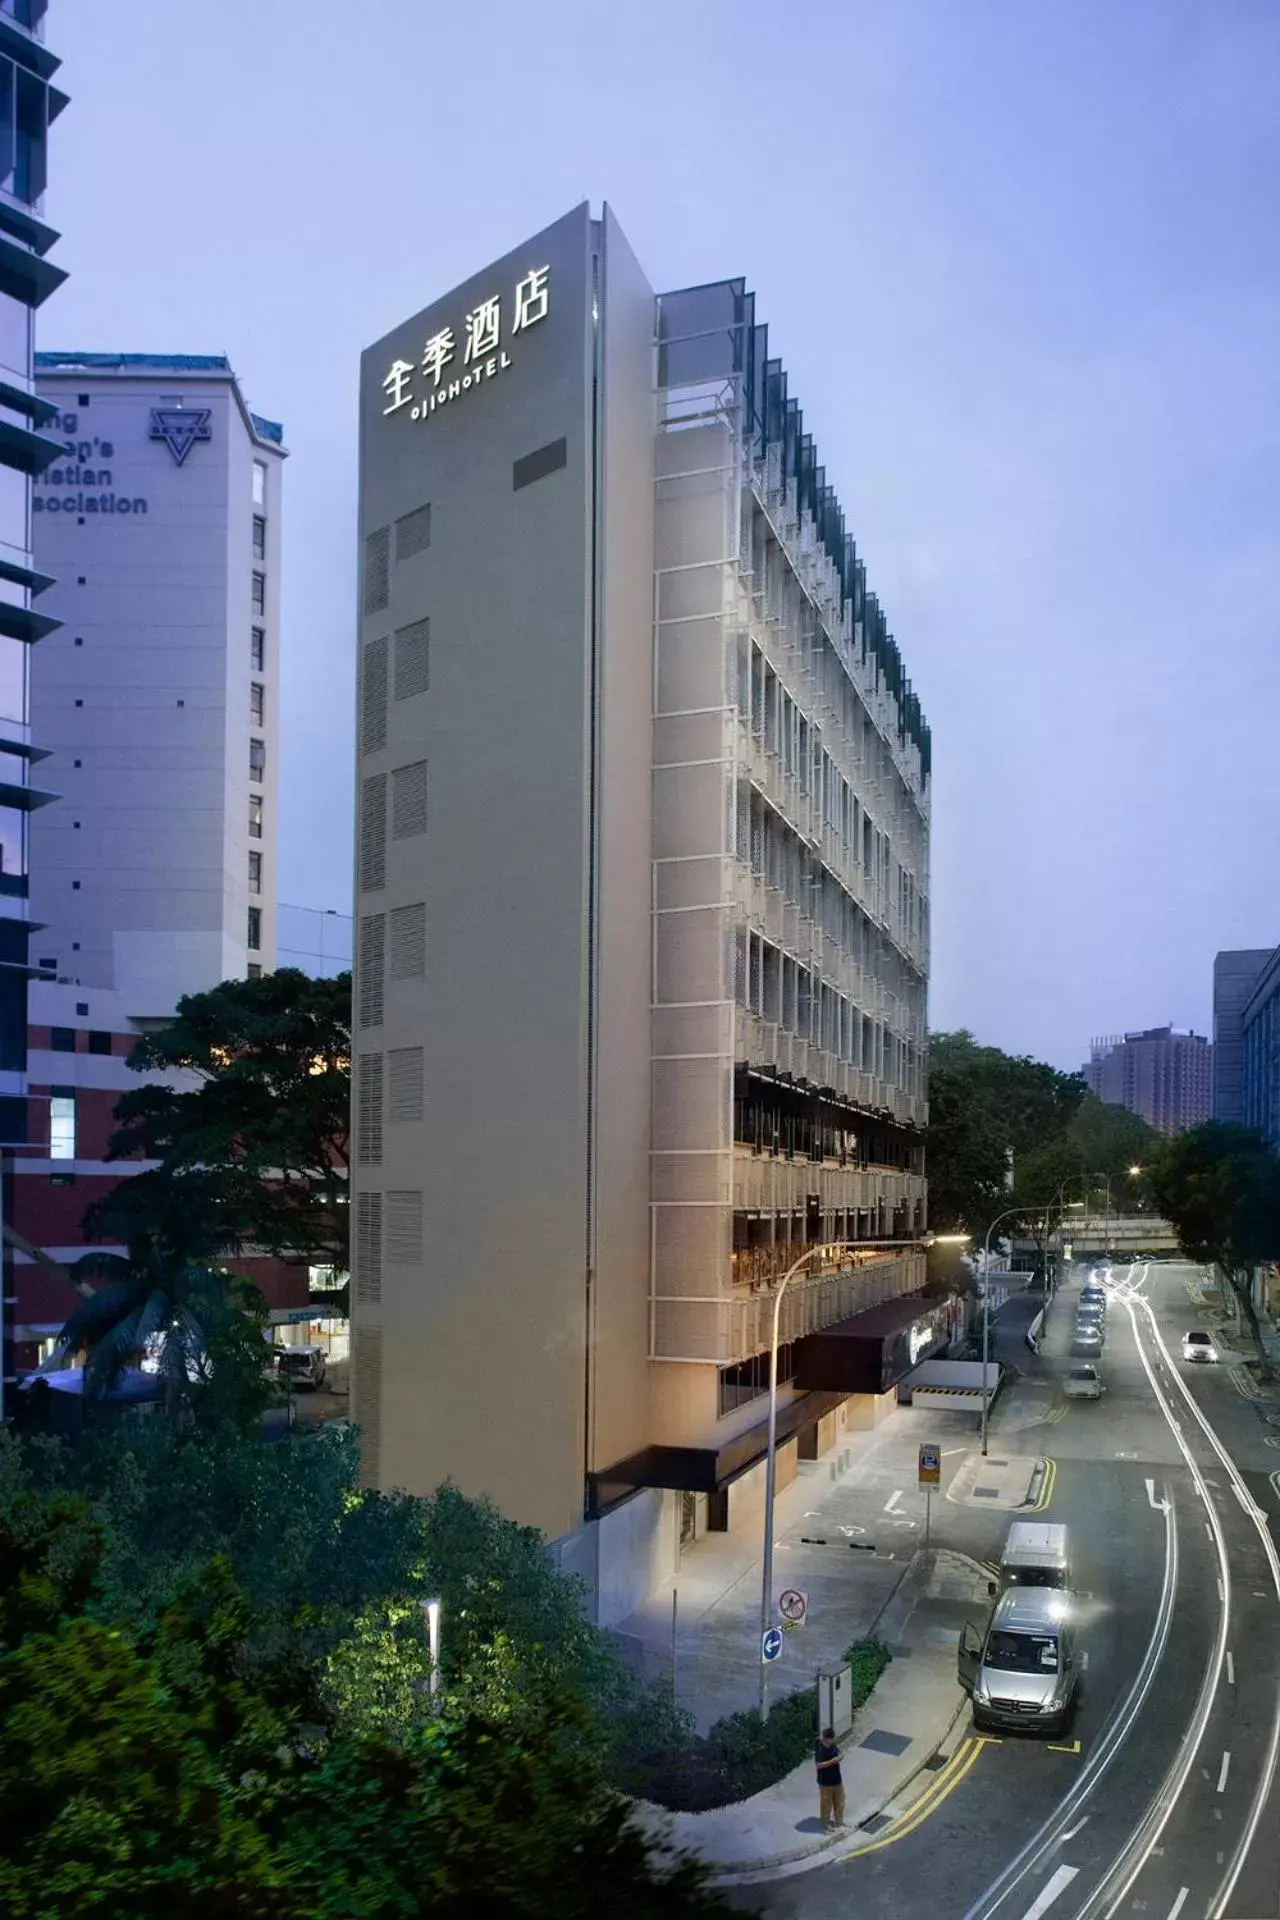 Property Building in Ji Hotel Orchard Singapore